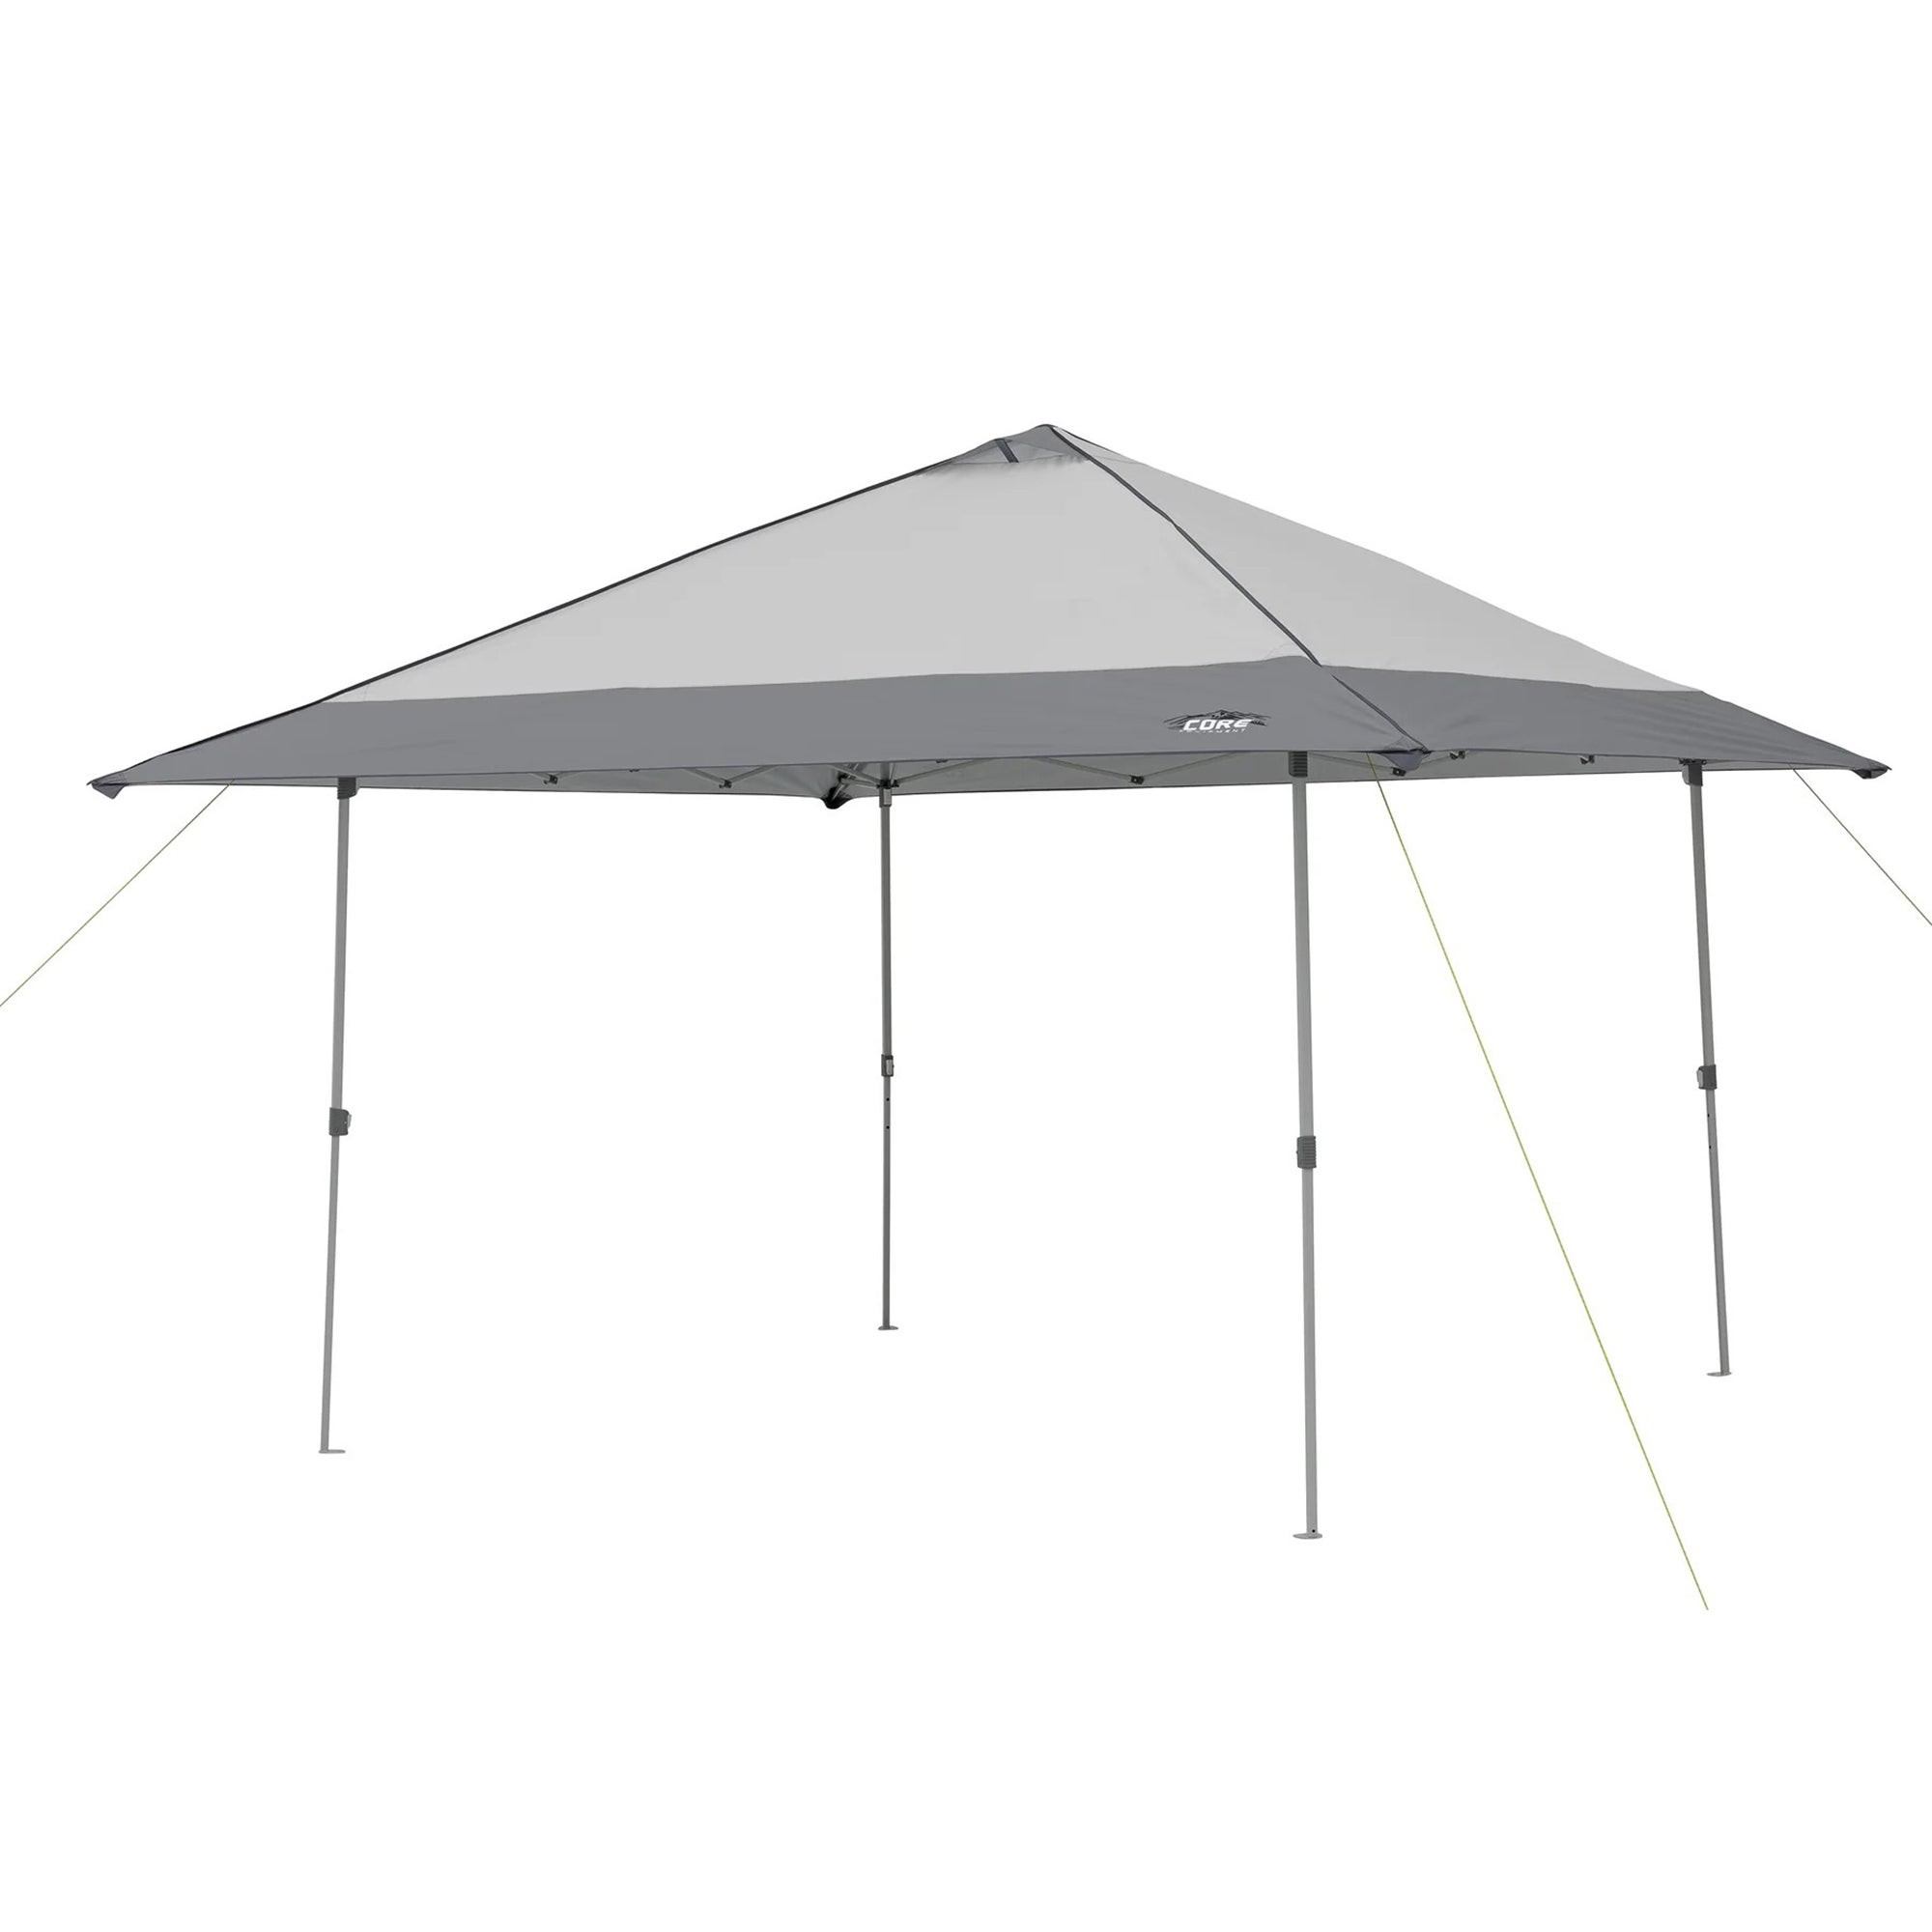 13ft x 13ft Instant Canopy